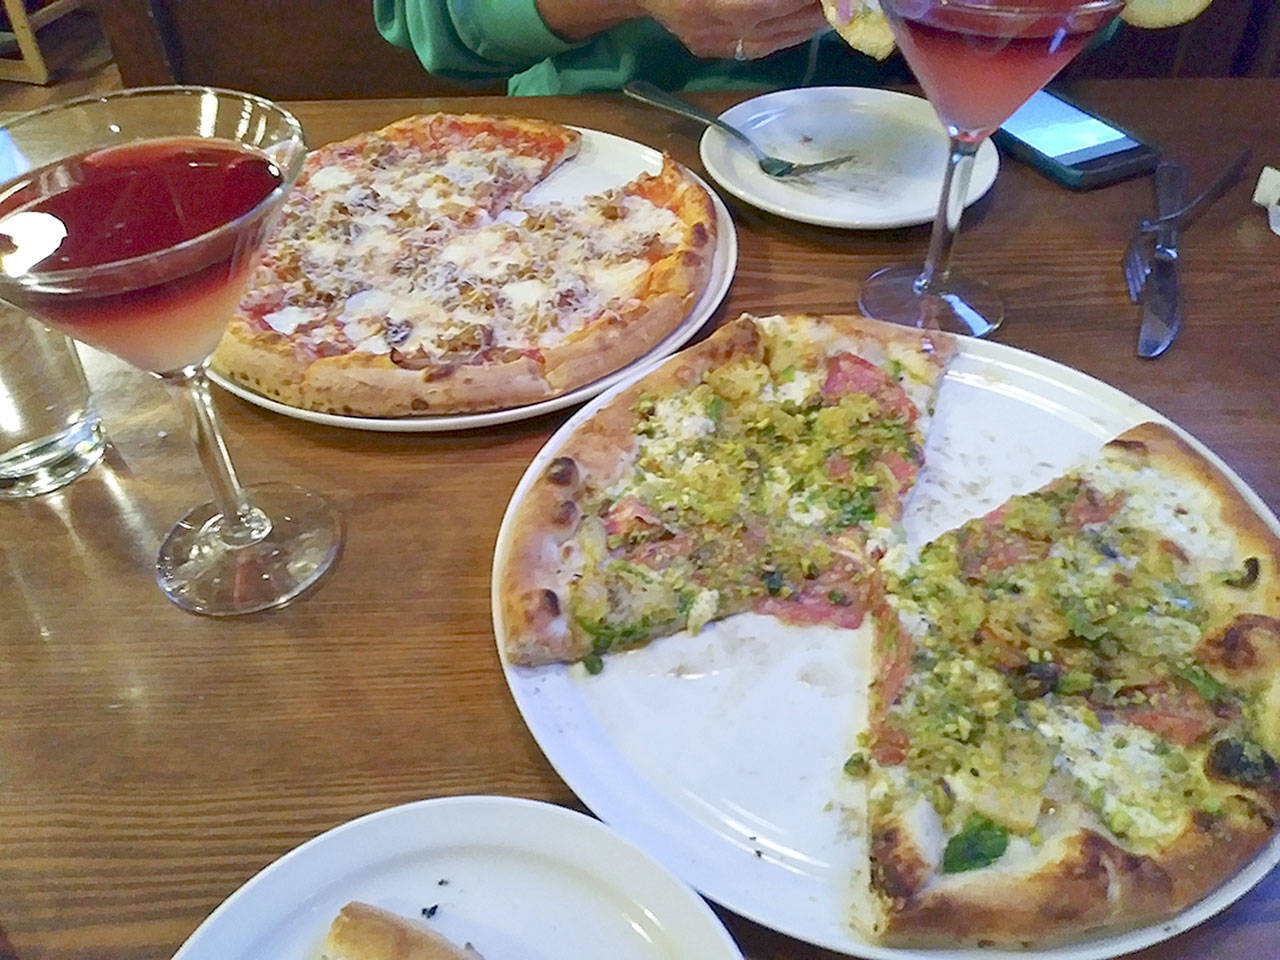 Pizza from Fat Olives: The pie on the right, the Belgio Dolce, features a white sauce base, mozzarella, pecorino romano, oregano, shaved fire-roasted brussel sprouts, calabrian chili oil, Molinari soppressata, local honey and crushed pistachios. One of the best pizzas ever and featured on the Food Network’s “Diners, Drive-ins and Dives.”